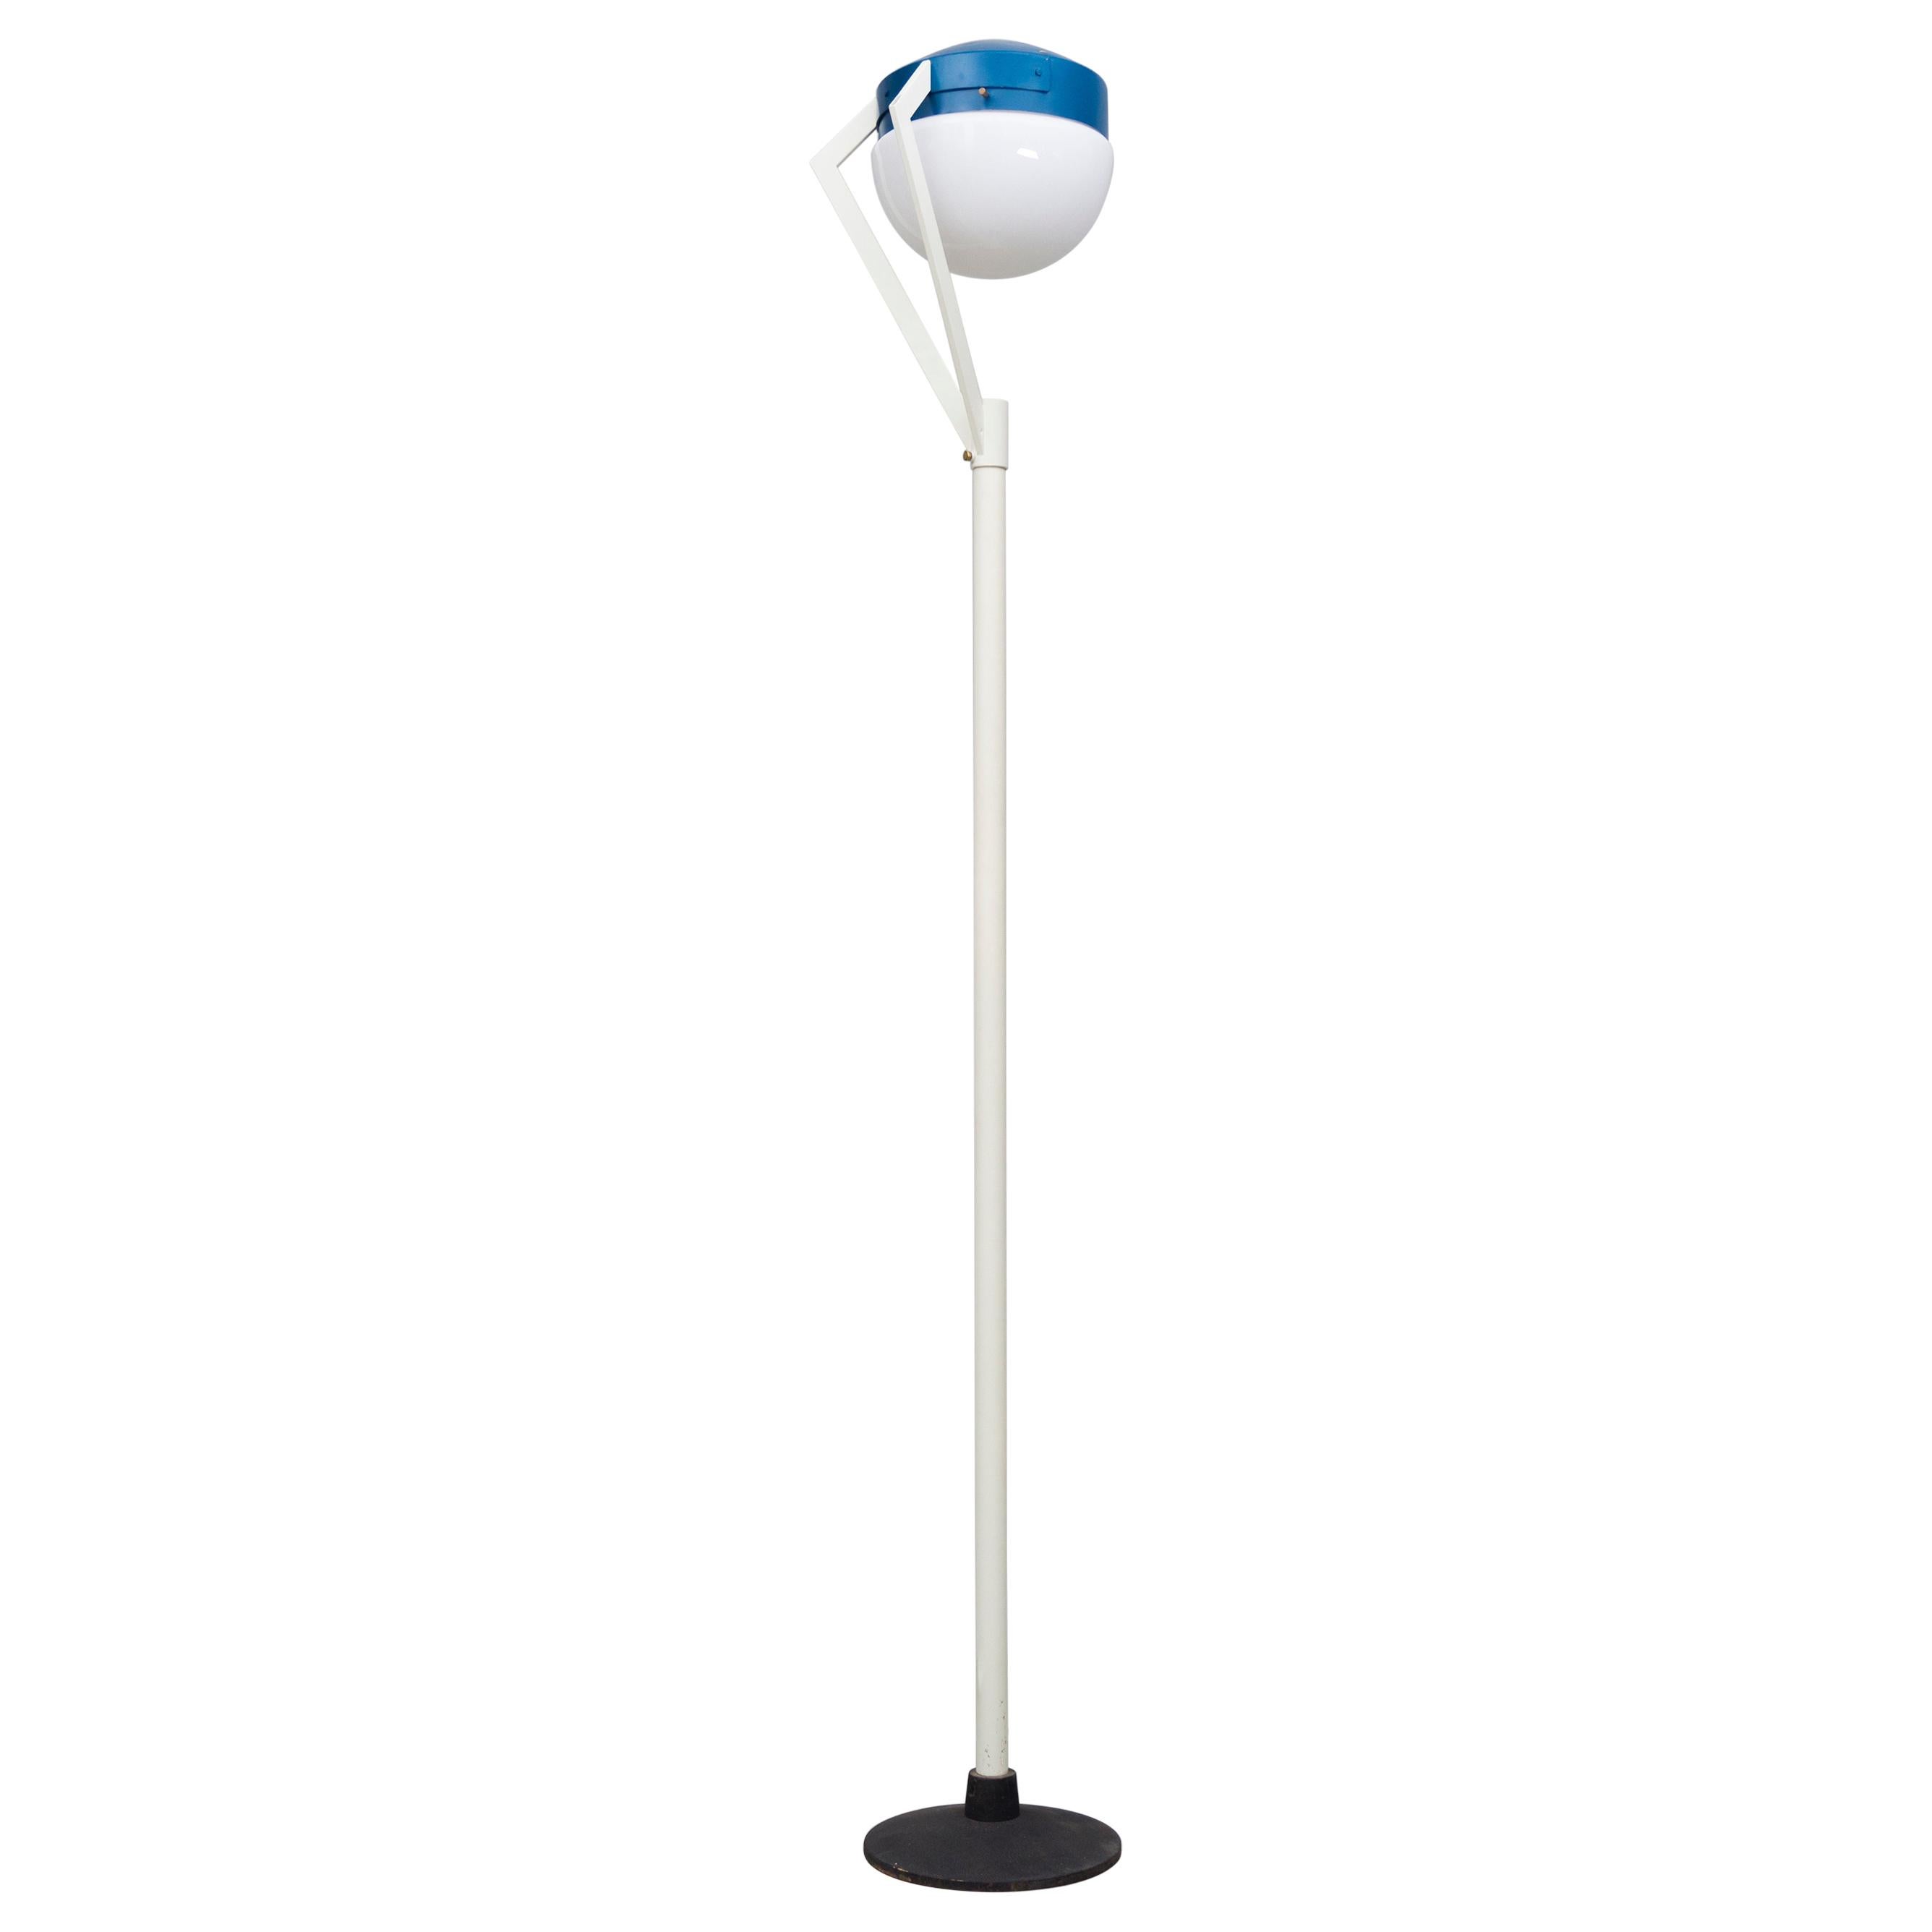 Tall floor lamp, white and blue metal, by Bruno Gatta, 1960